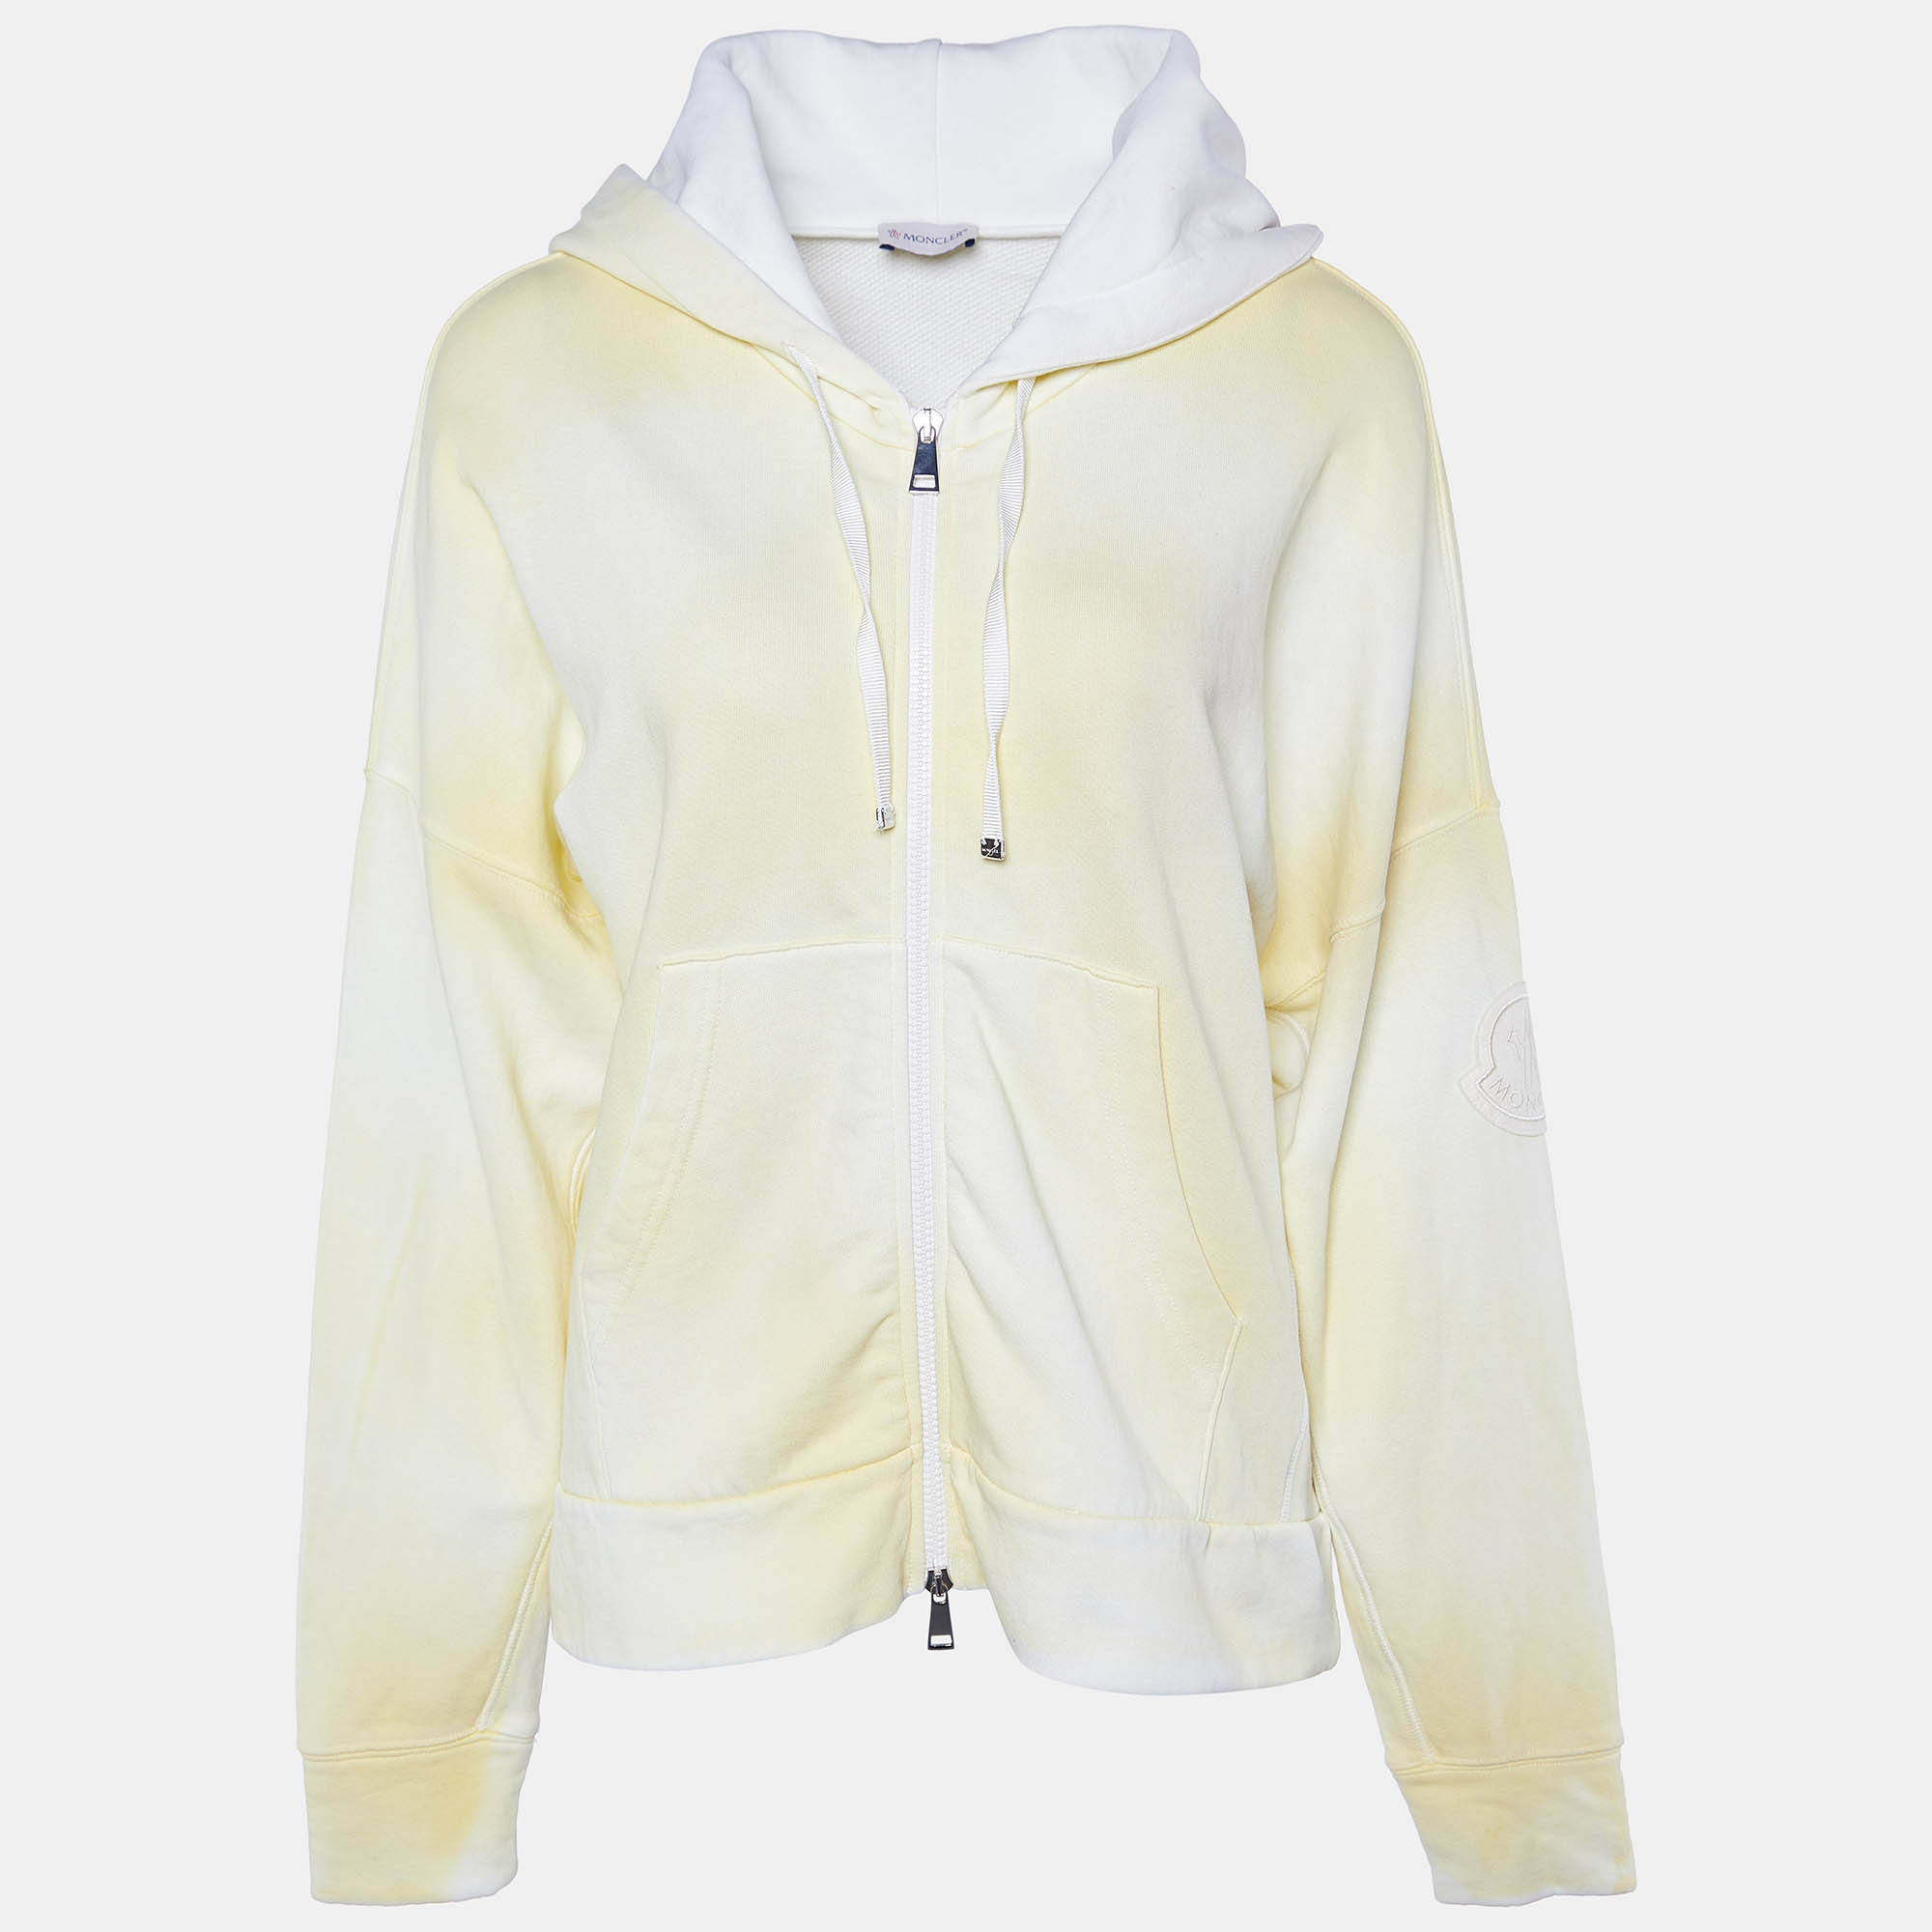 Indulge in vibrant luxury with the Moncler cardigan. Crafted from premium cotton its sunny hue and tie dye motif evoke a sense of playful sophistication. The zip up design and cozy hood offer both style and comfort making it a standout addition to any wardrobe.